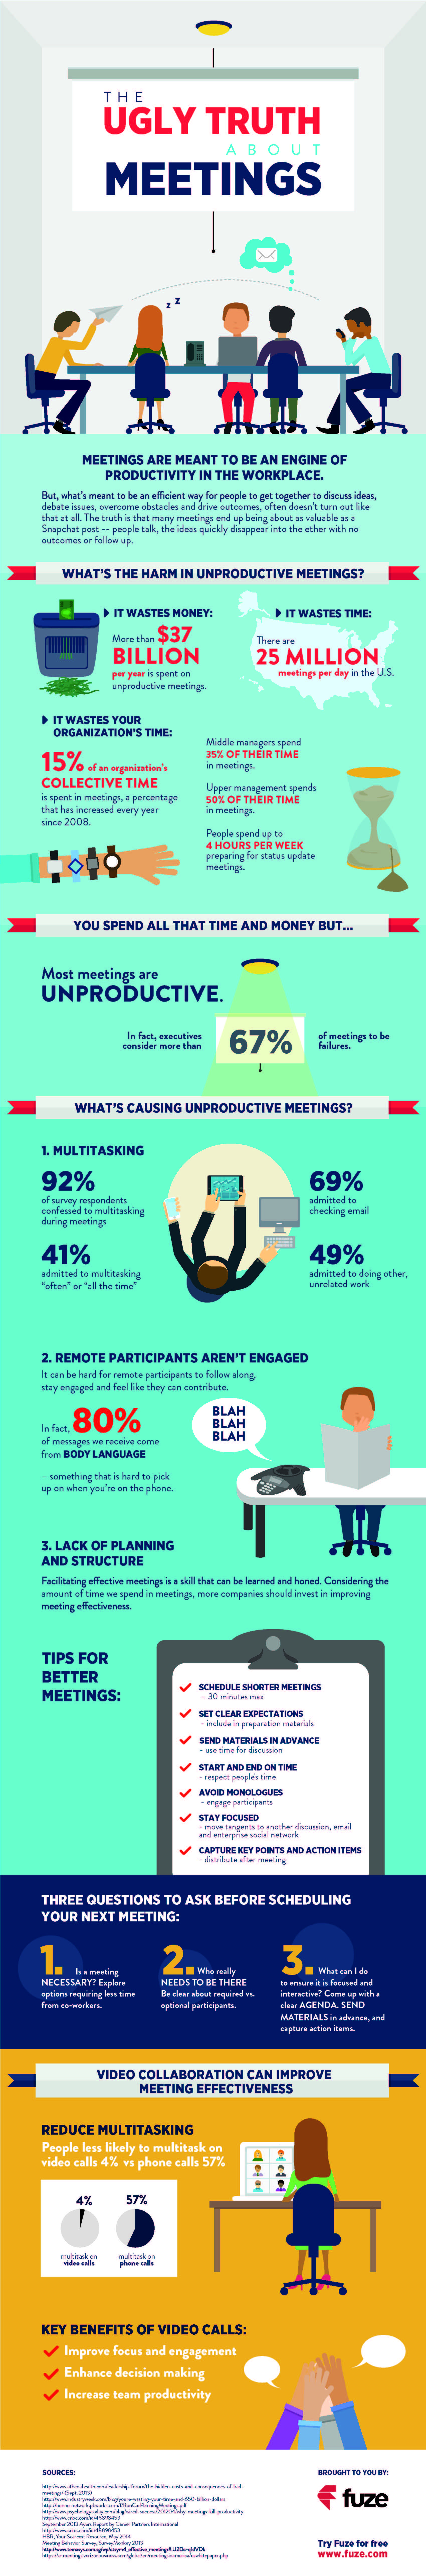 7 Tips for Better Meetings (Infographic)